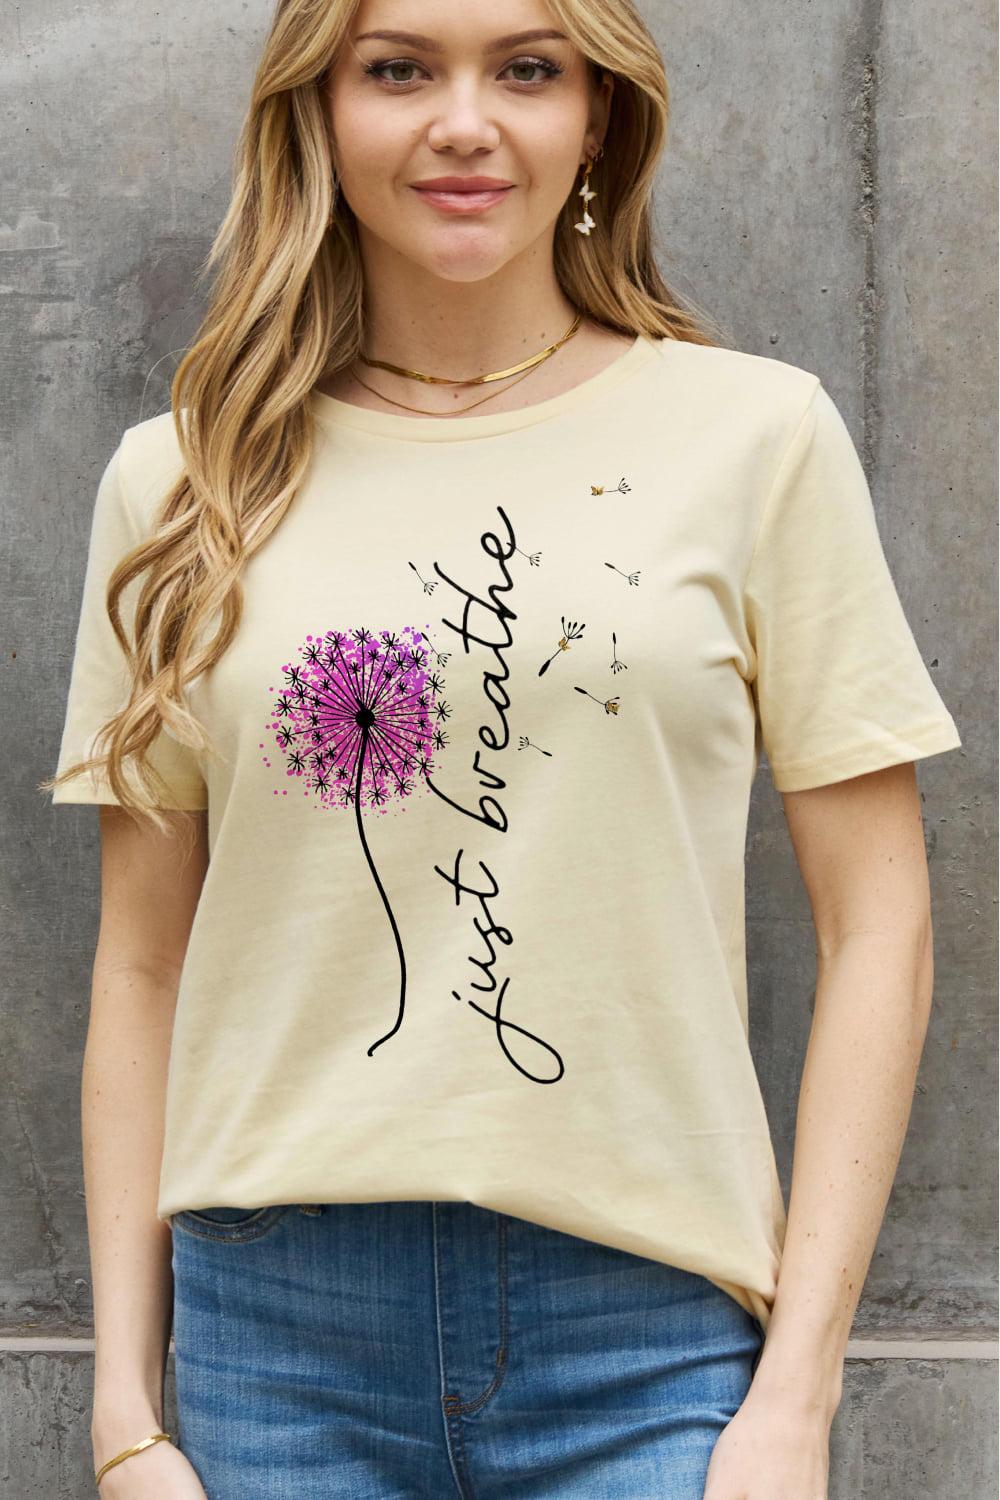 Simply Love Full Size JUST BREATHE Graphic Cotton Tee BLUE ZONE PLANET